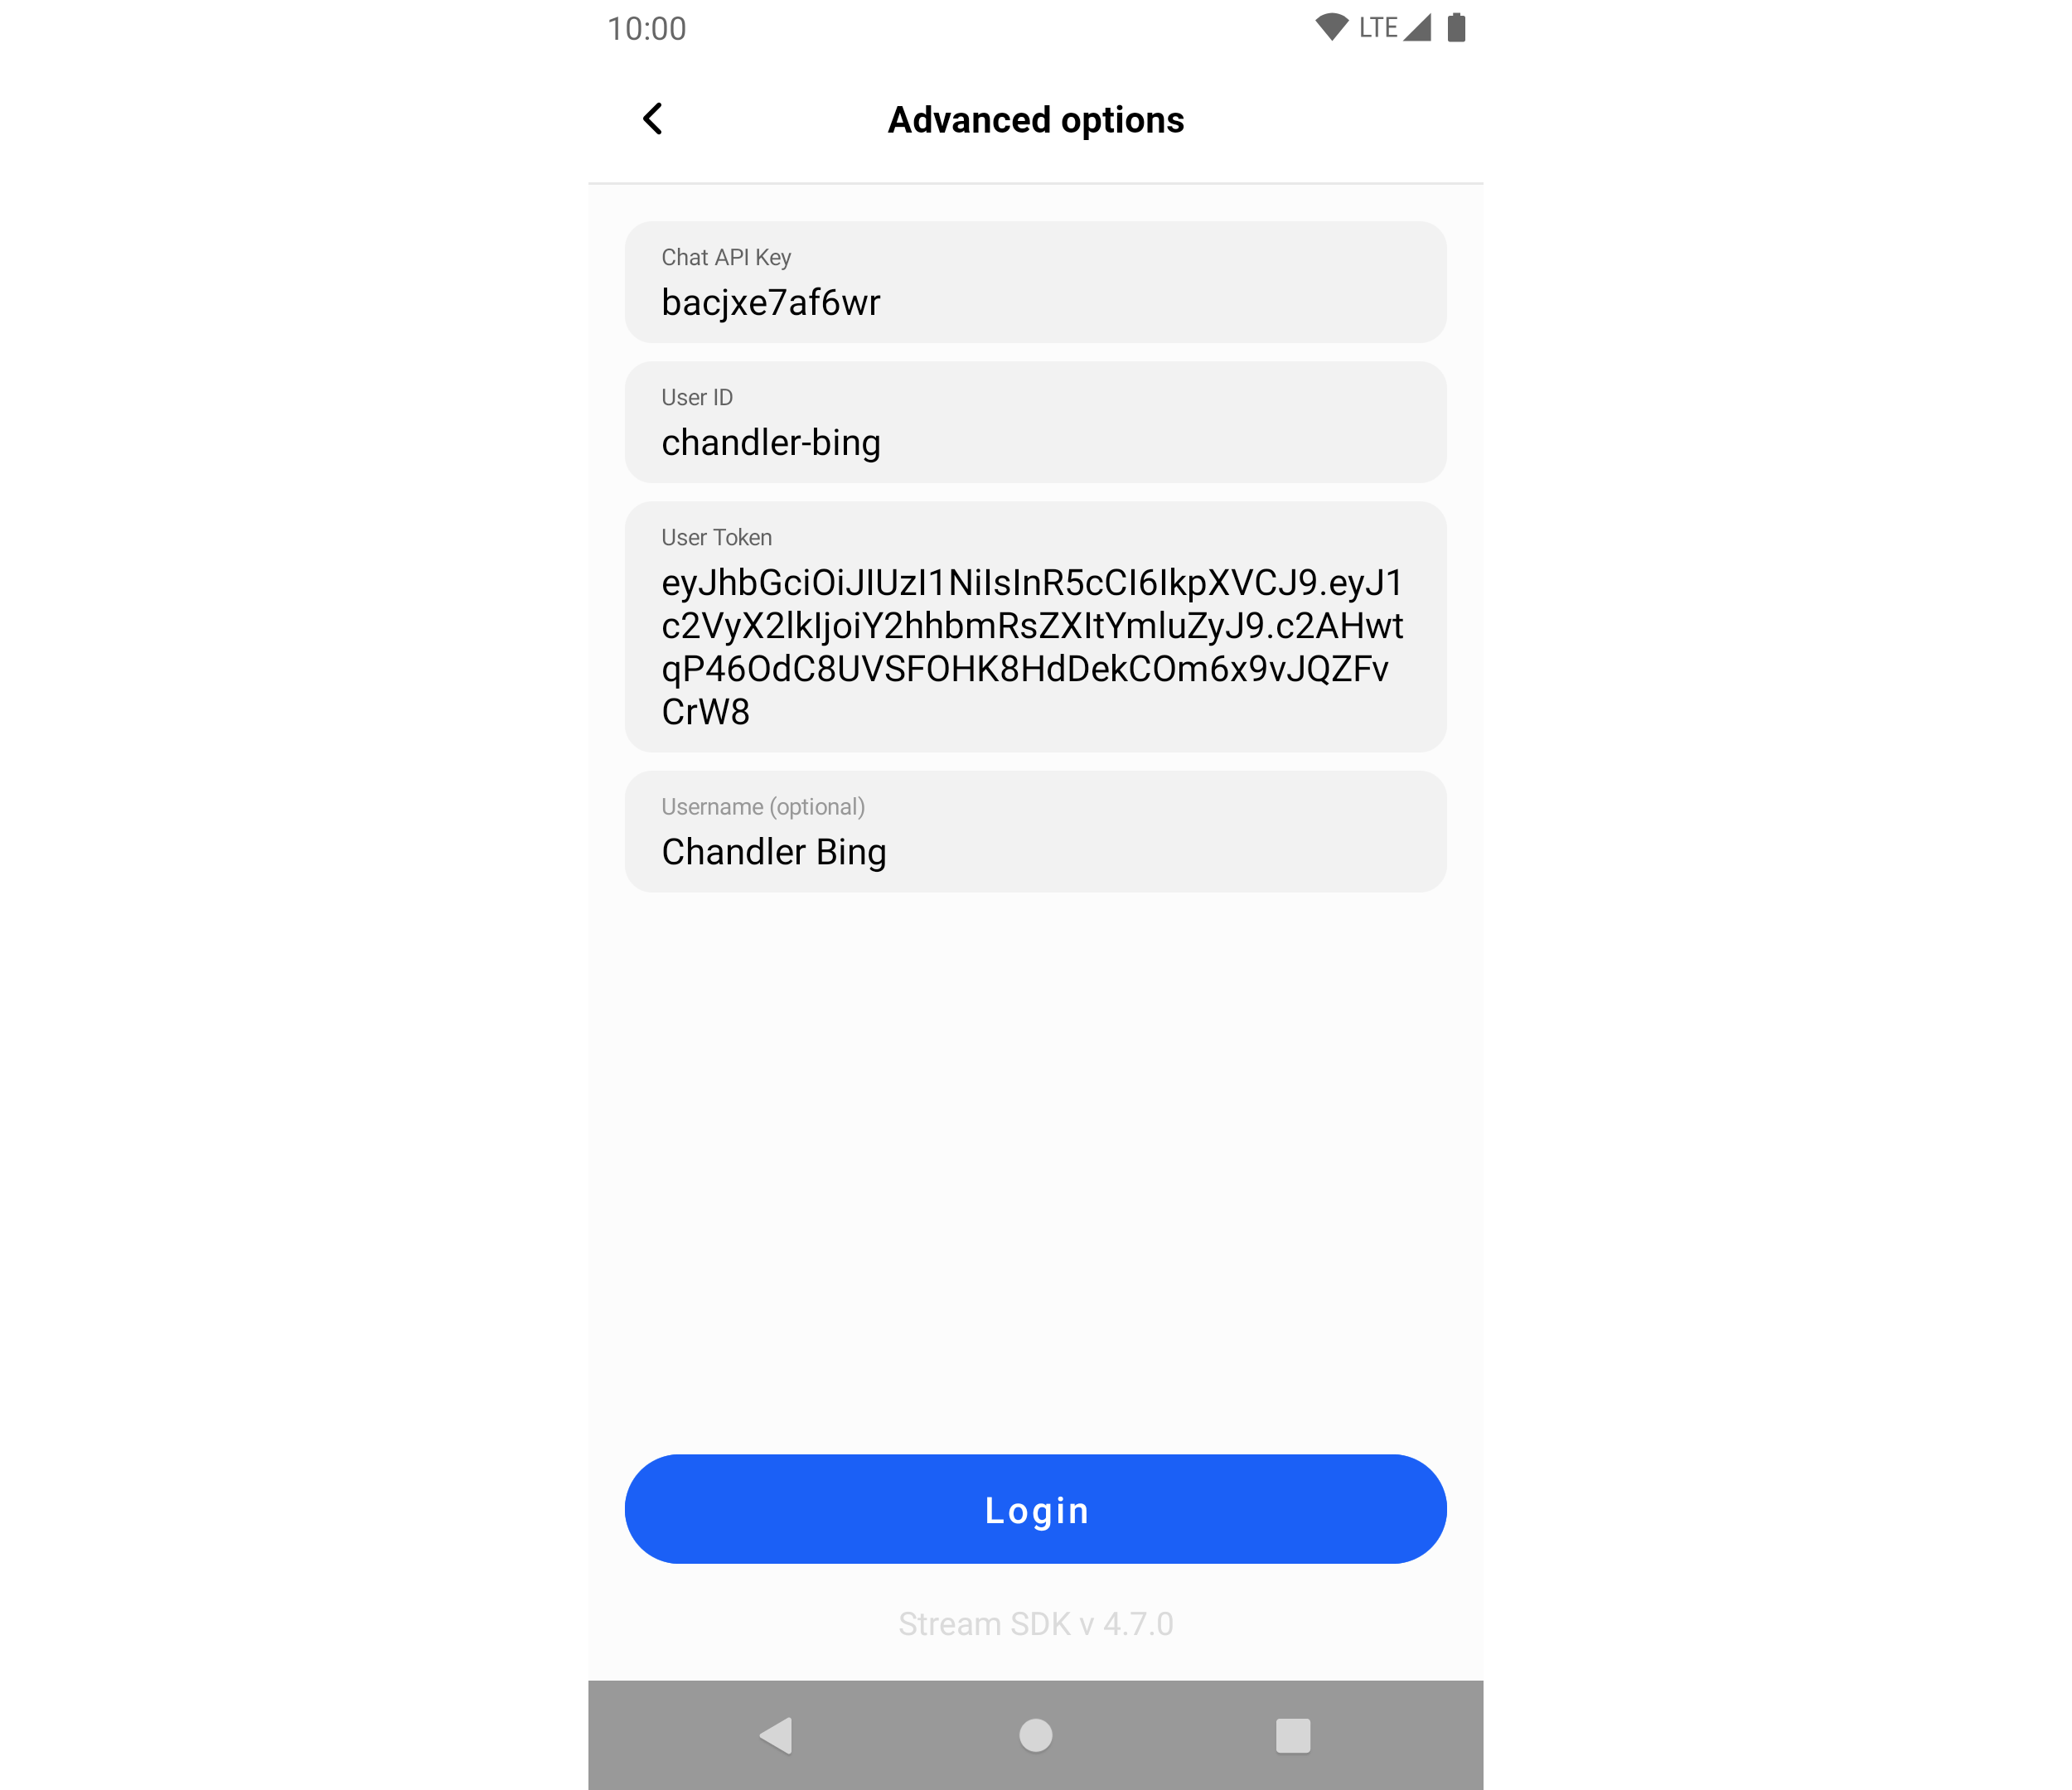 Putting in user details in the sample app